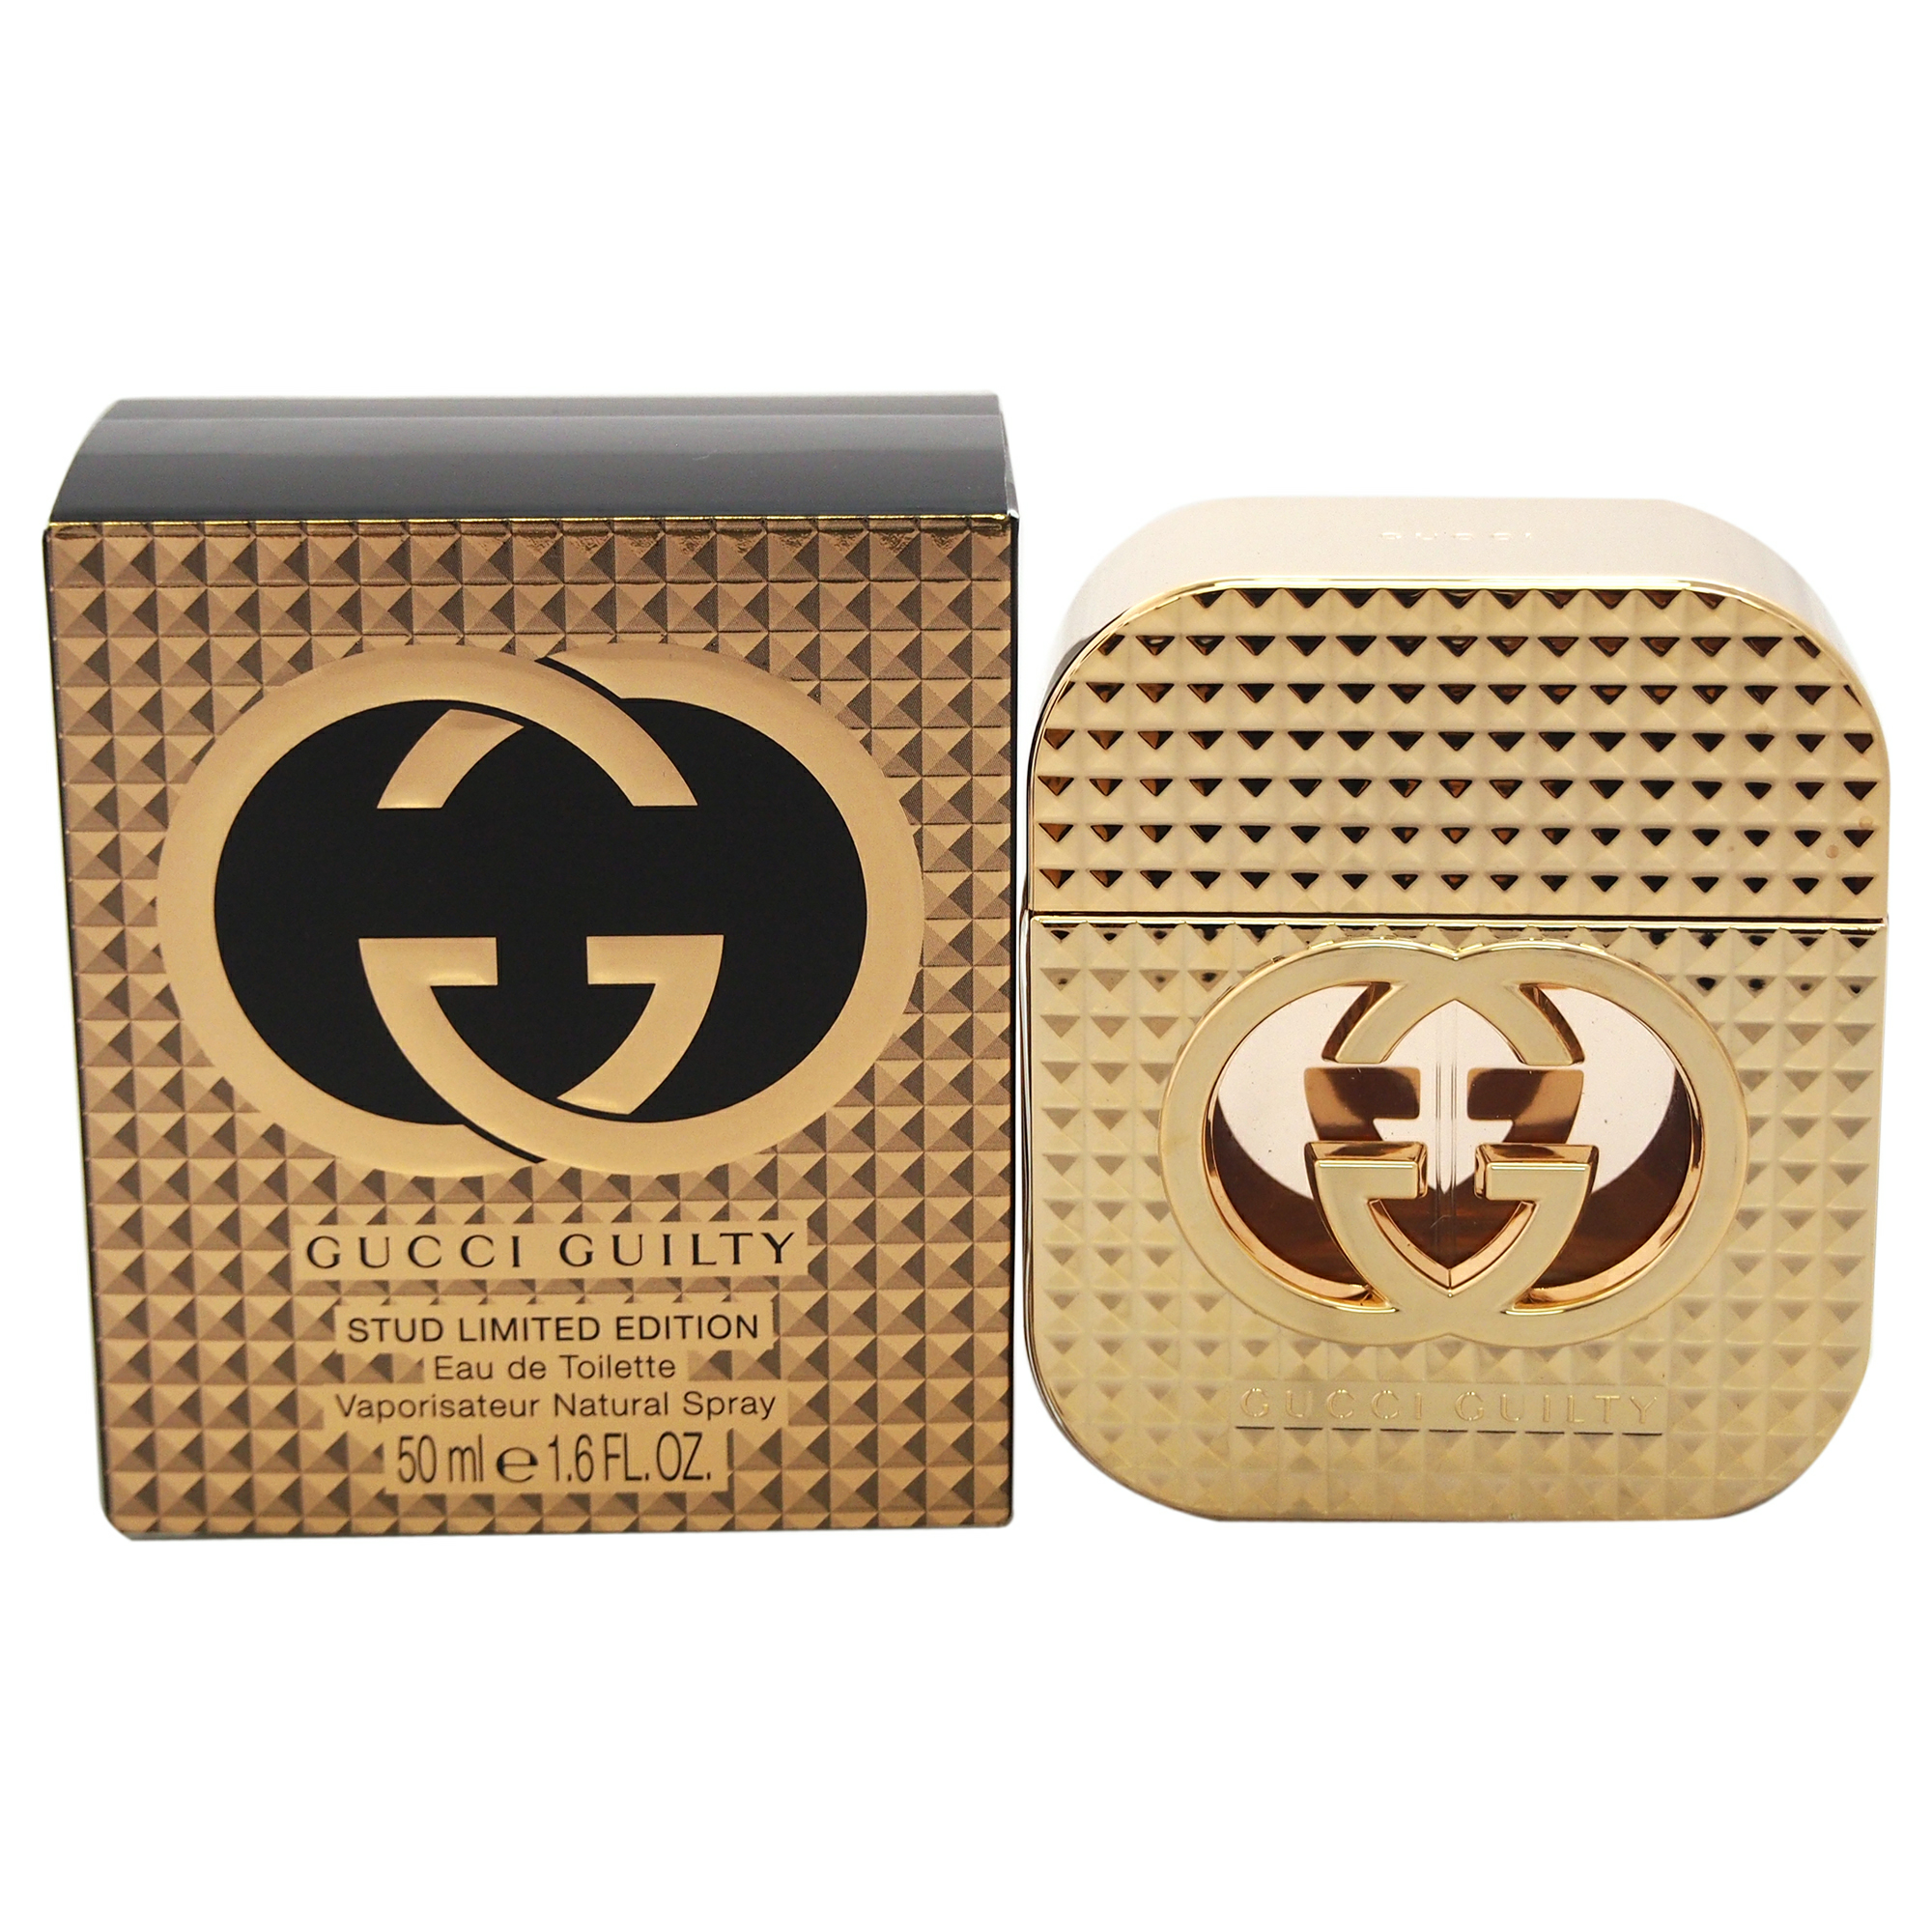 GIORGIO BEVERLY HILLS, INC. Gucci Guilty Stud by Gucci for Women 1.6 oz EDT Spray (Limited Edition)